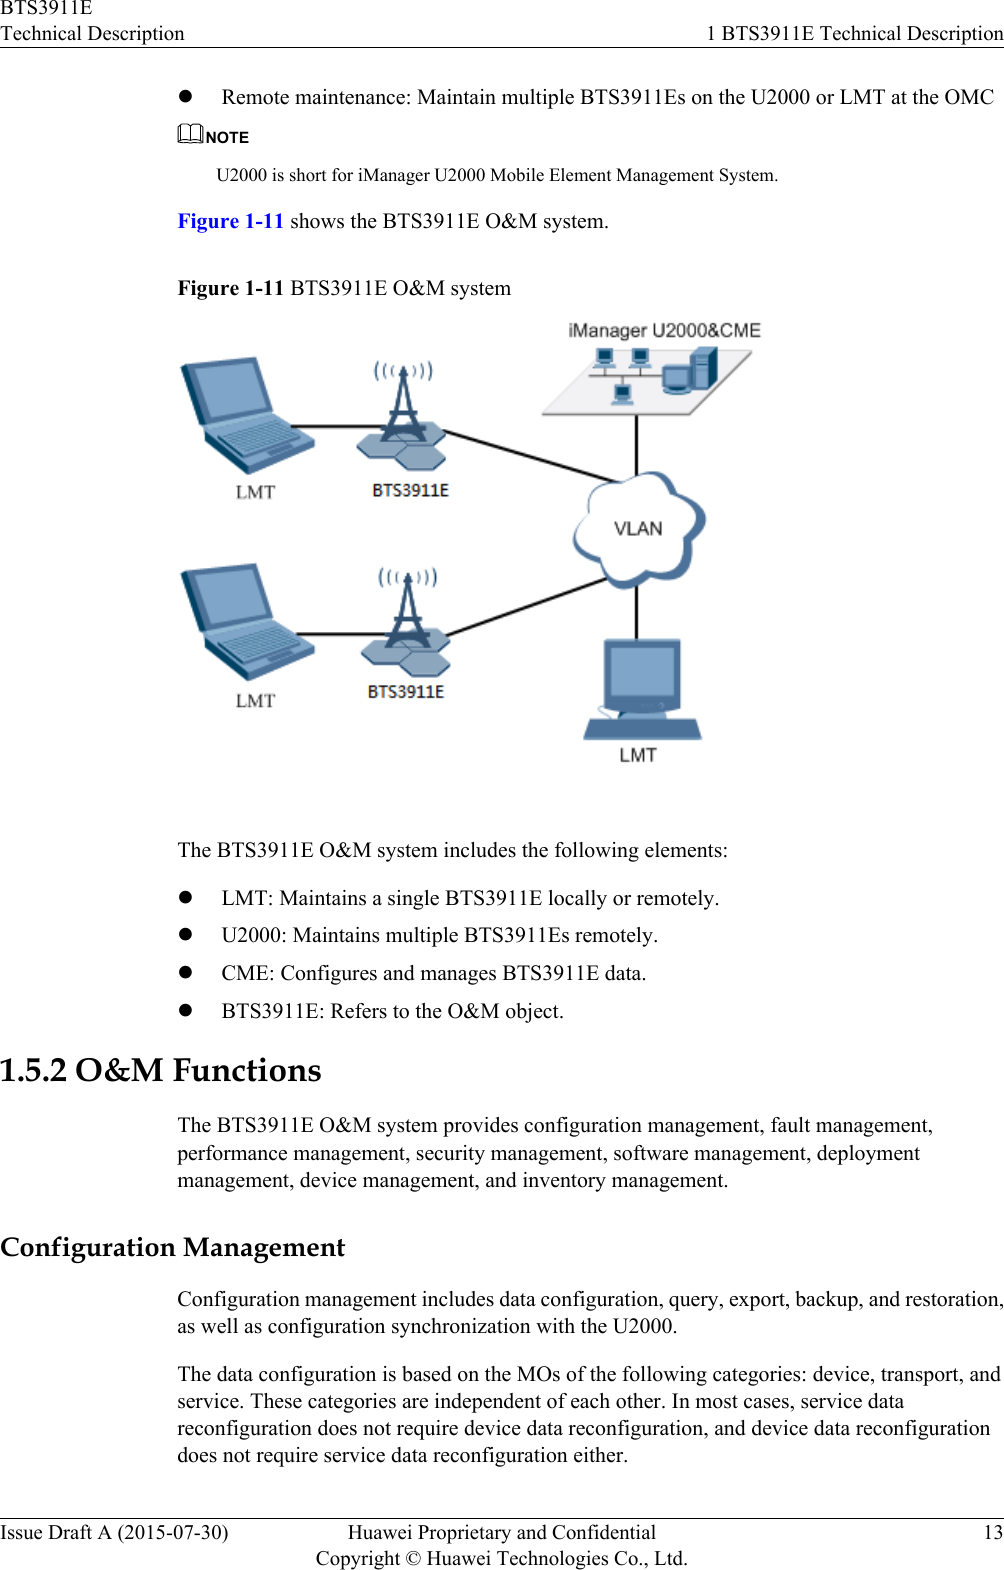 lRemote maintenance: Maintain multiple BTS3911Es on the U2000 or LMT at the OMCNOTEU2000 is short for iManager U2000 Mobile Element Management System.Figure 1-11 shows the BTS3911E O&amp;M system.Figure 1-11 BTS3911E O&amp;M systemThe BTS3911E O&amp;M system includes the following elements:lLMT: Maintains a single BTS3911E locally or remotely.lU2000: Maintains multiple BTS3911Es remotely.lCME: Configures and manages BTS3911E data.lBTS3911E: Refers to the O&amp;M object.1.5.2 O&amp;M FunctionsThe BTS3911E O&amp;M system provides configuration management, fault management,performance management, security management, software management, deploymentmanagement, device management, and inventory management.Configuration ManagementConfiguration management includes data configuration, query, export, backup, and restoration,as well as configuration synchronization with the U2000.The data configuration is based on the MOs of the following categories: device, transport, andservice. These categories are independent of each other. In most cases, service datareconfiguration does not require device data reconfiguration, and device data reconfigurationdoes not require service data reconfiguration either.BTS3911ETechnical Description 1 BTS3911E Technical DescriptionIssue Draft A (2015-07-30) Huawei Proprietary and ConfidentialCopyright © Huawei Technologies Co., Ltd.13